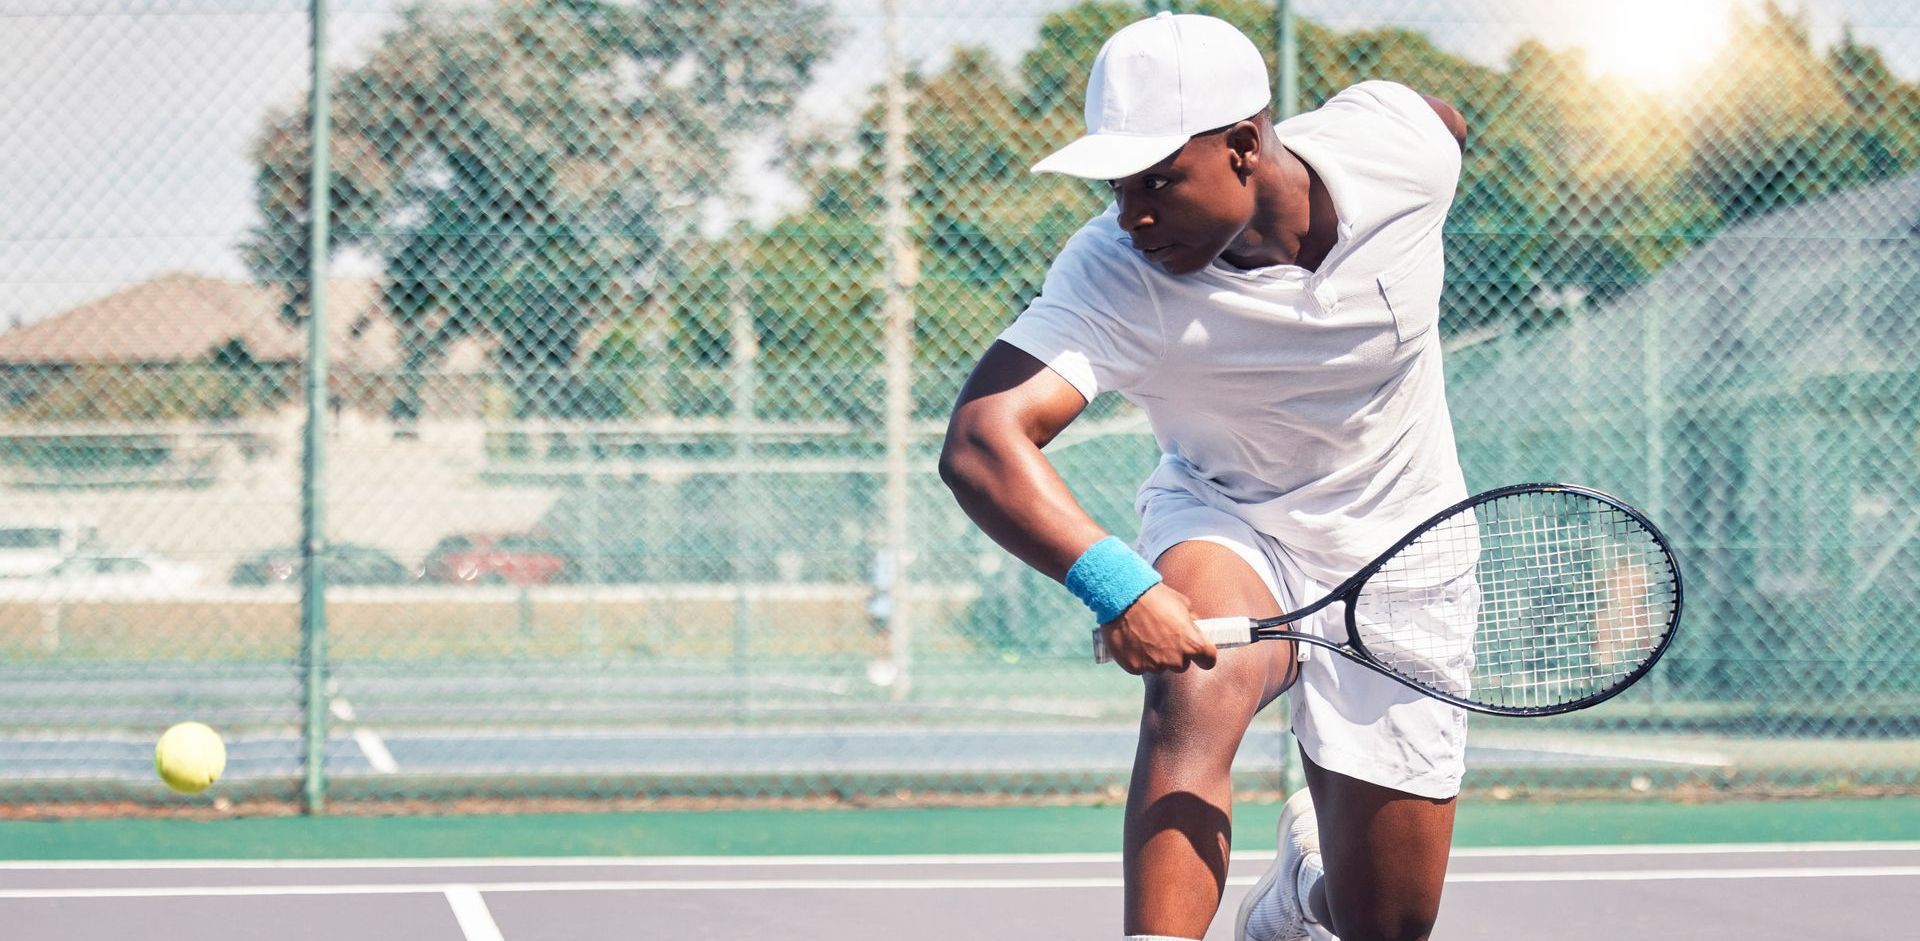 Man is playing tennis on a tennis court. Nonsurgical regenerative medicine procedures are providing relief for people with chronic shoulder pain.